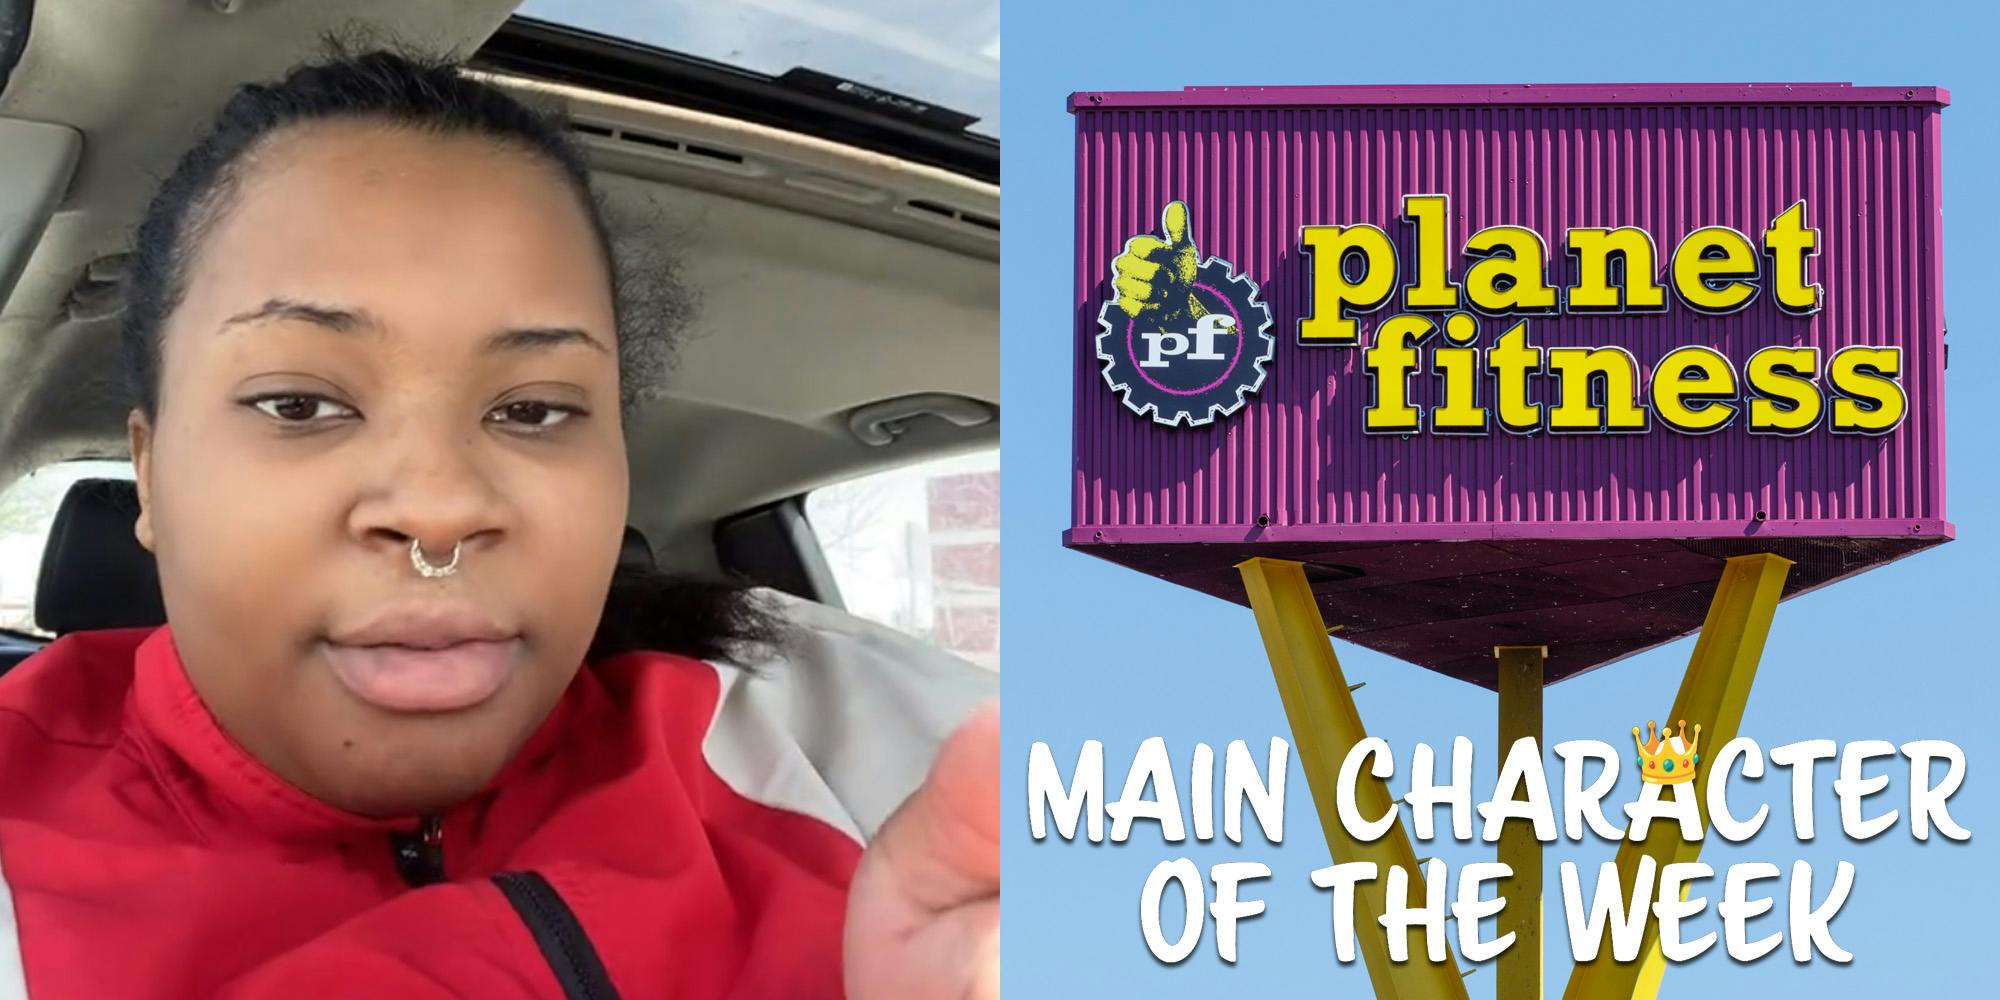 Main Character of the Week: Woman whose car was disabled by a dealership at a Planet Fitness